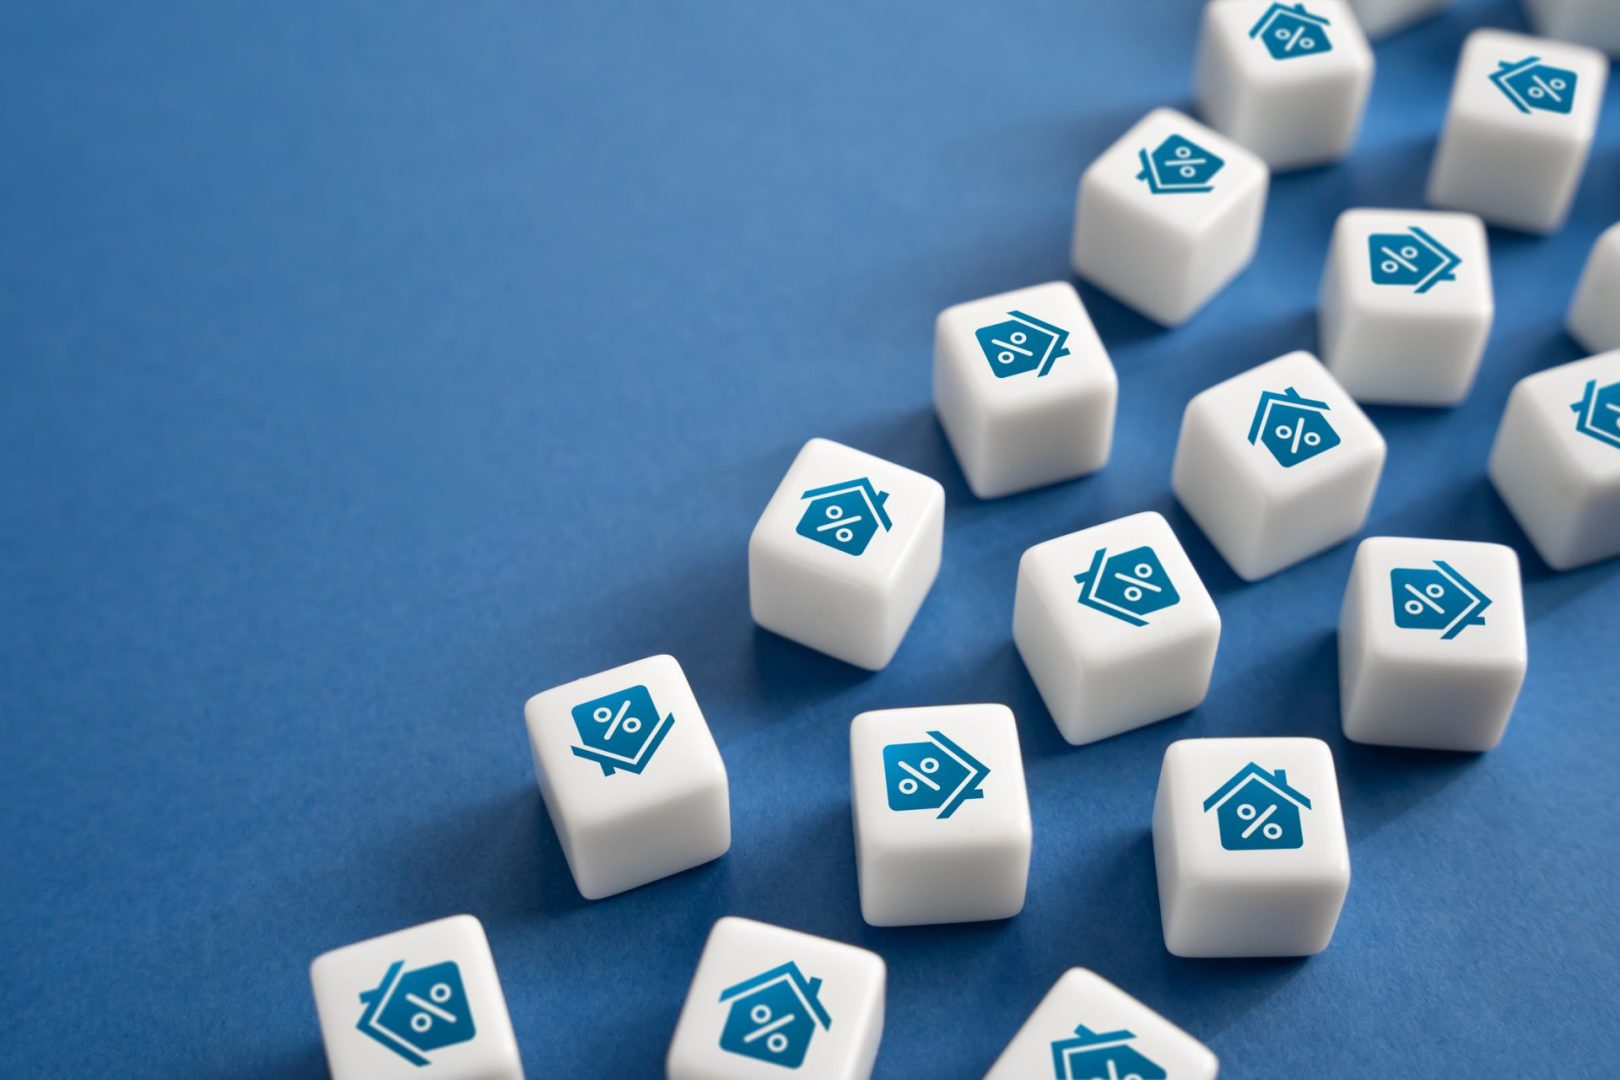 White cubes showing icons of houses with percentage symbols, laid out across a blue surface